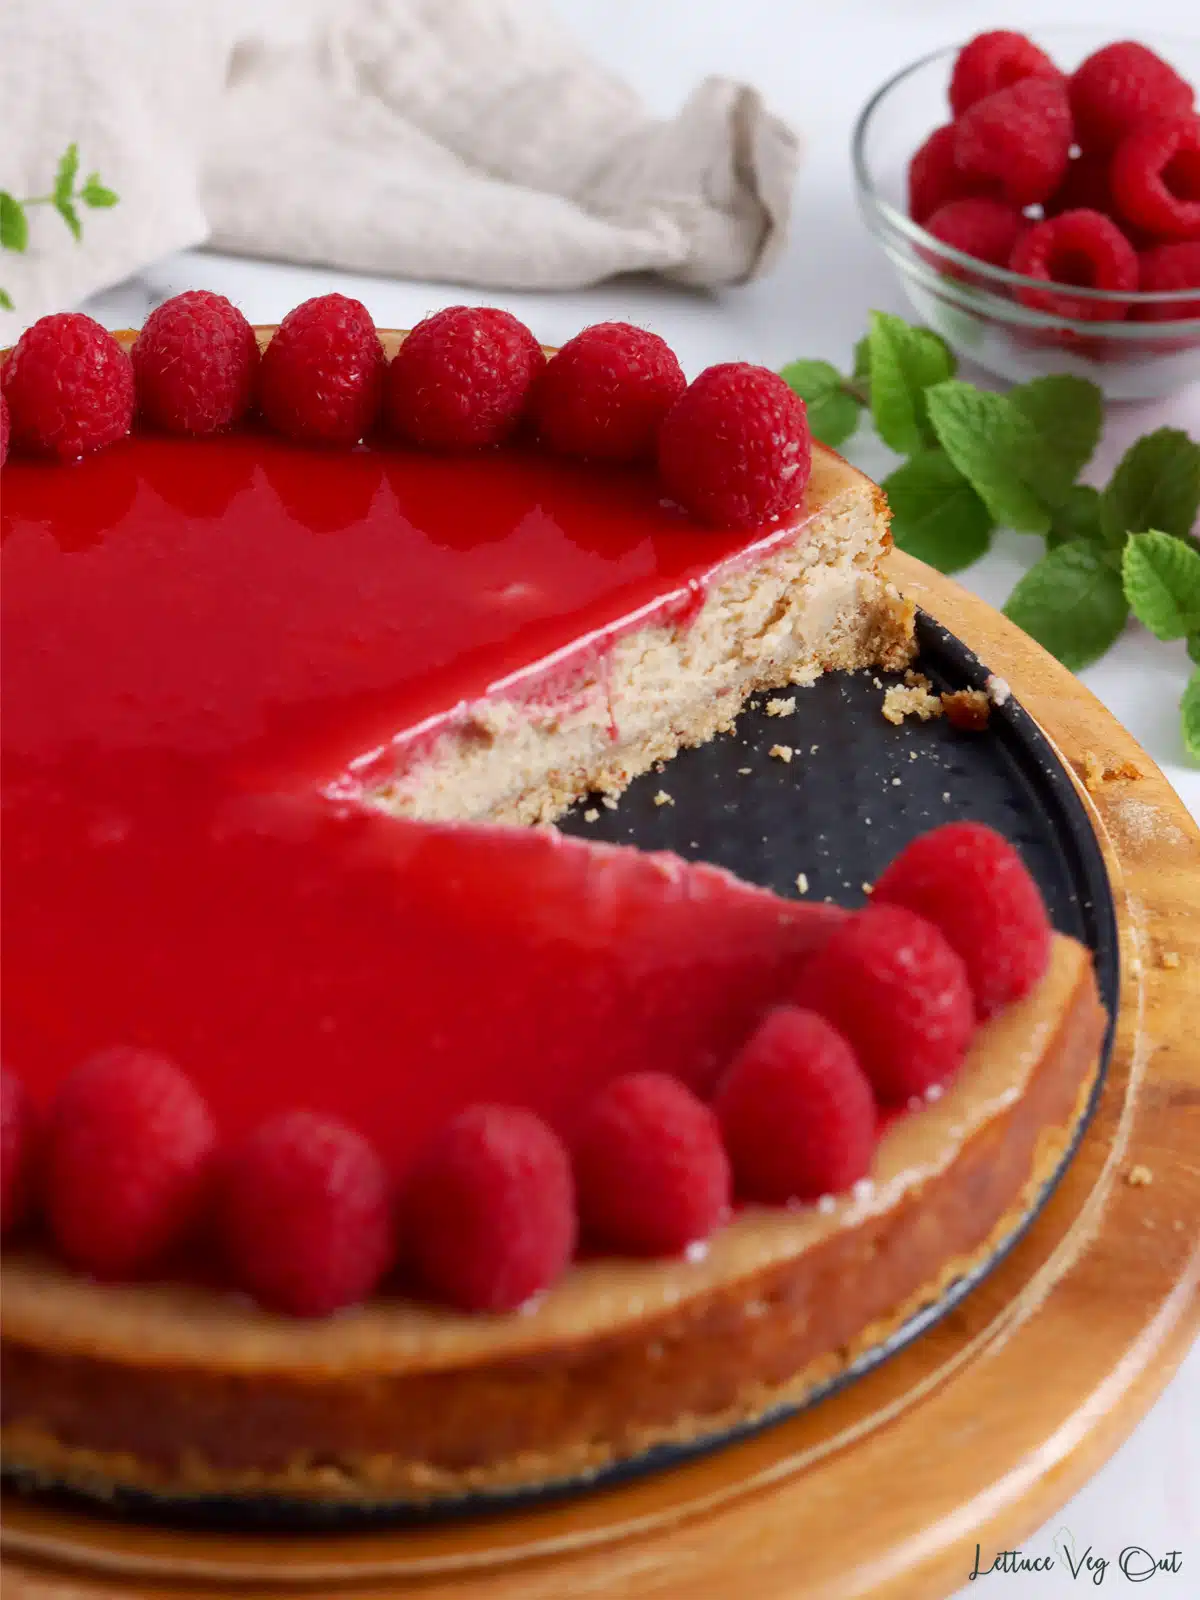 Cheesecake with raspberry sauce and fresh raspberry topping with slices cut out, showing texture of cheesecake.